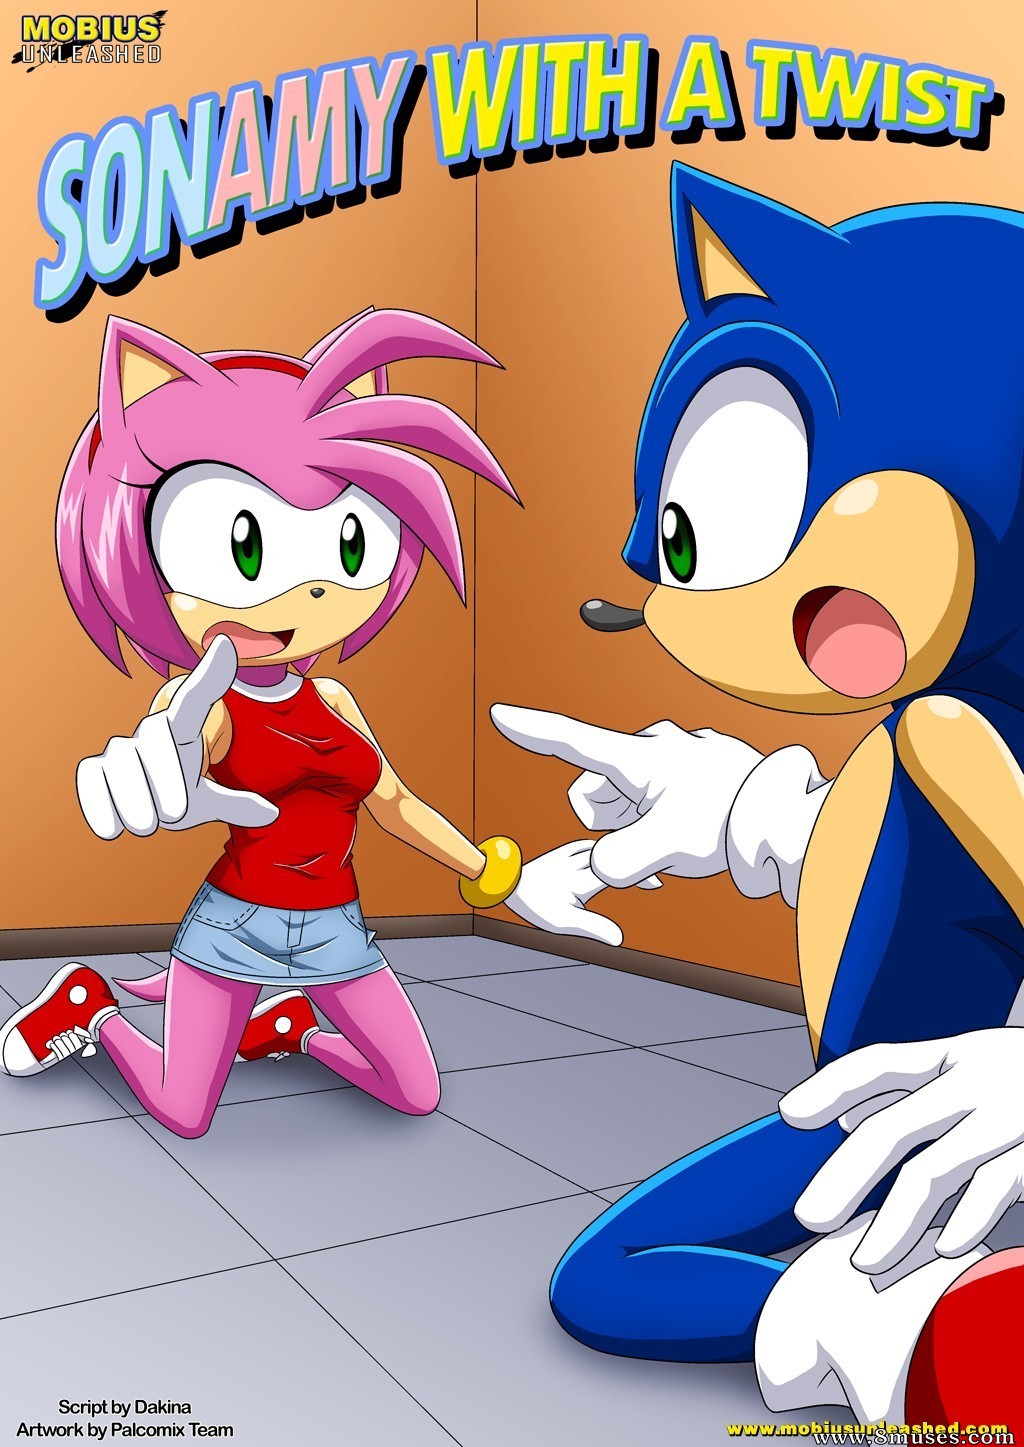 Amy - Sonic and Amy with a TWIST Issue 1 - 8muses Comics - Sex Comics and Porn  Cartoons